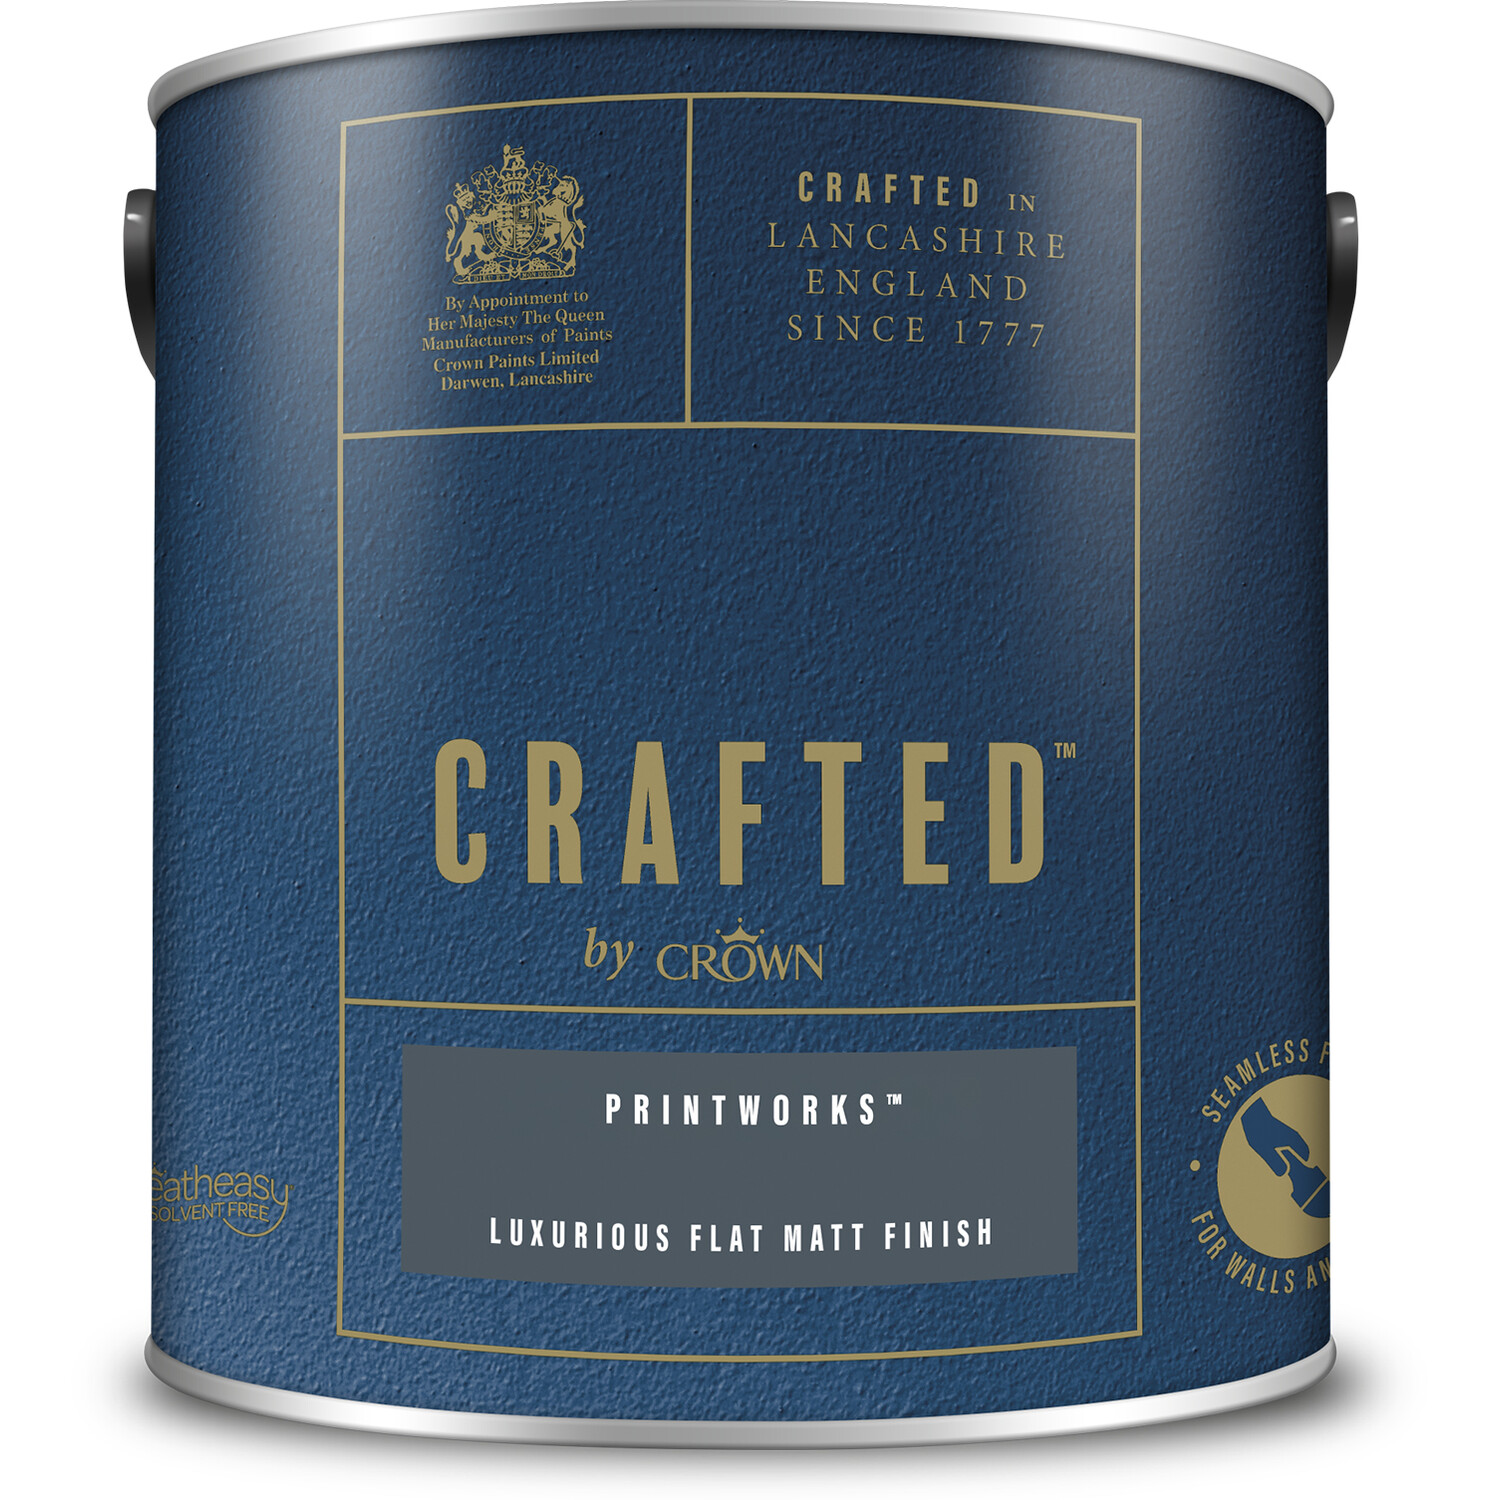 Crown Crafted Walls and Wood Printworks Luxurious Flat Matt Paint 2.5L Image 2